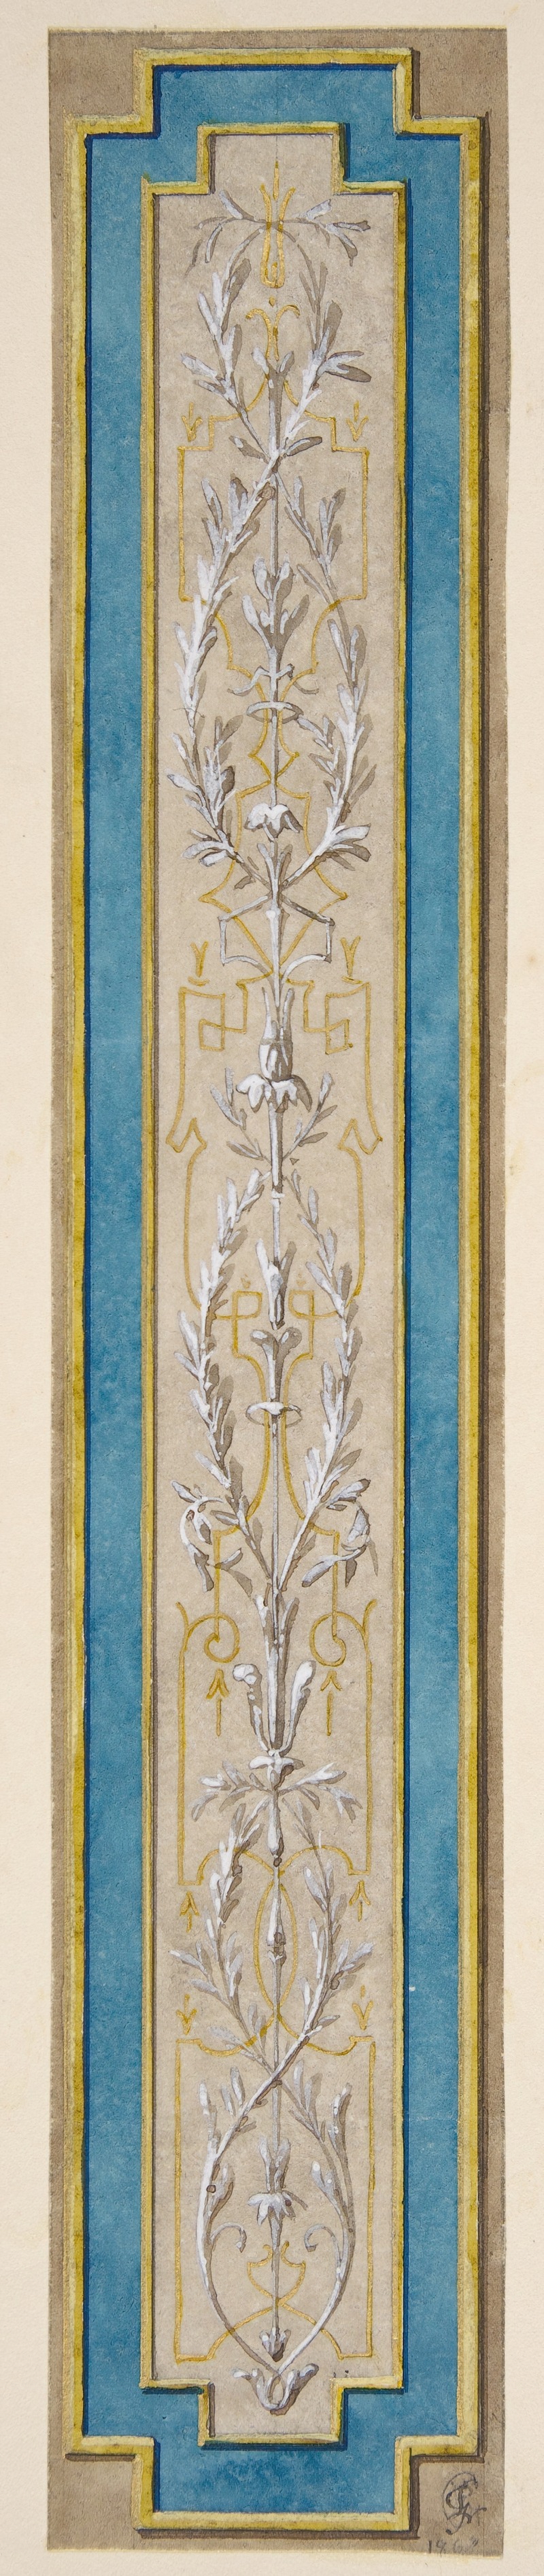 Jules-Edmond-Charles Lachaise - Design for a decorative panel painted in rococco style